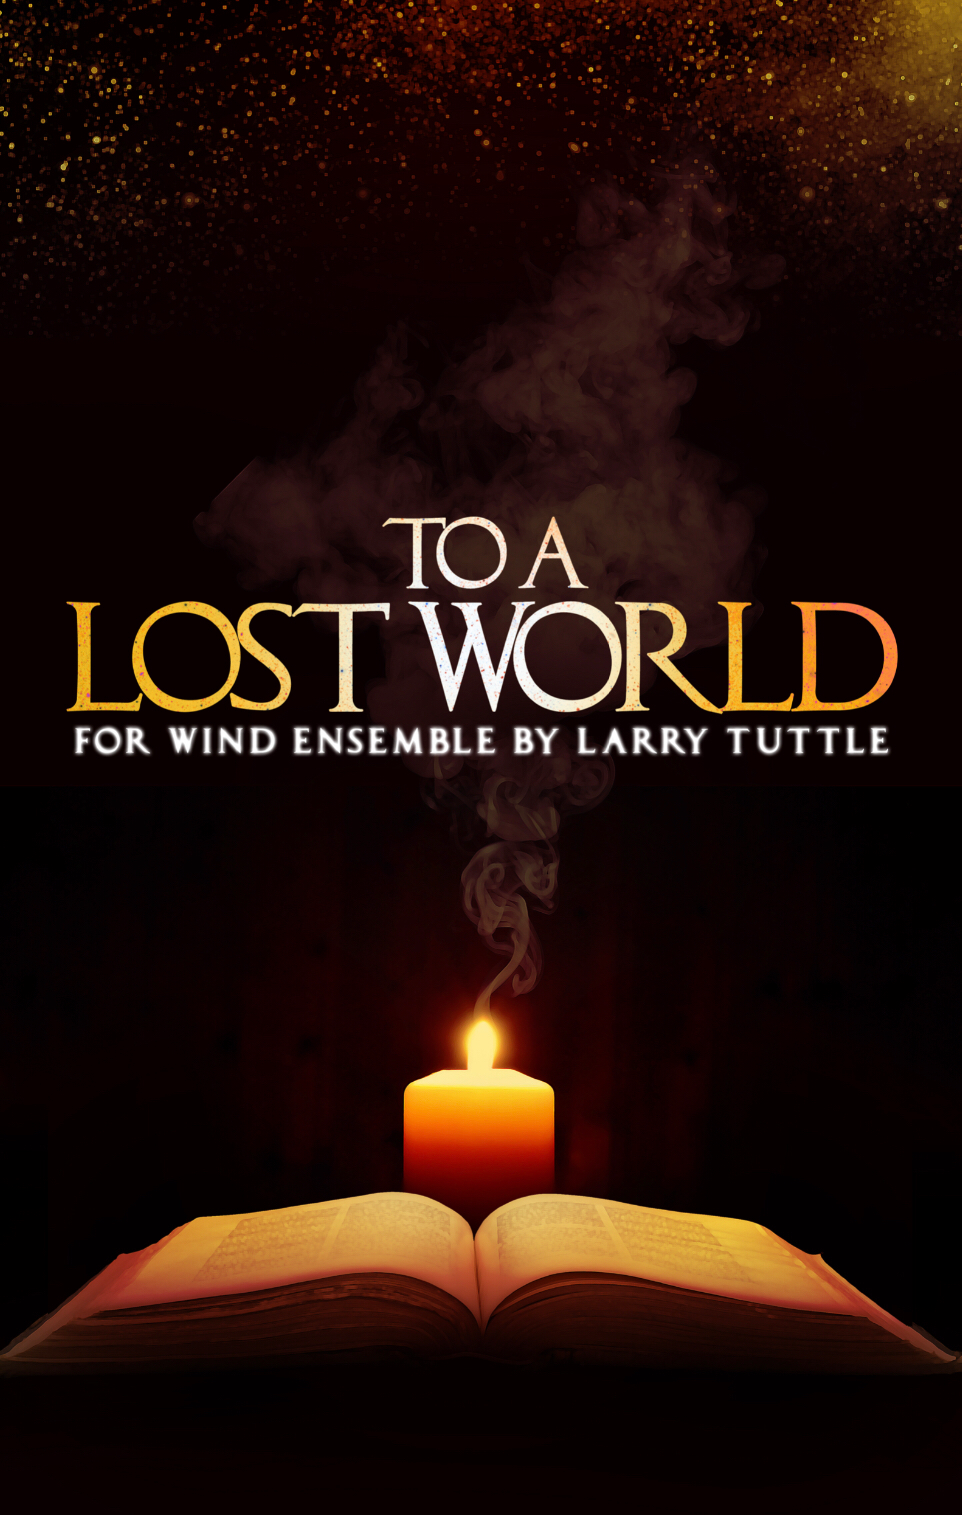 To A Lost World by Larry Tuttle